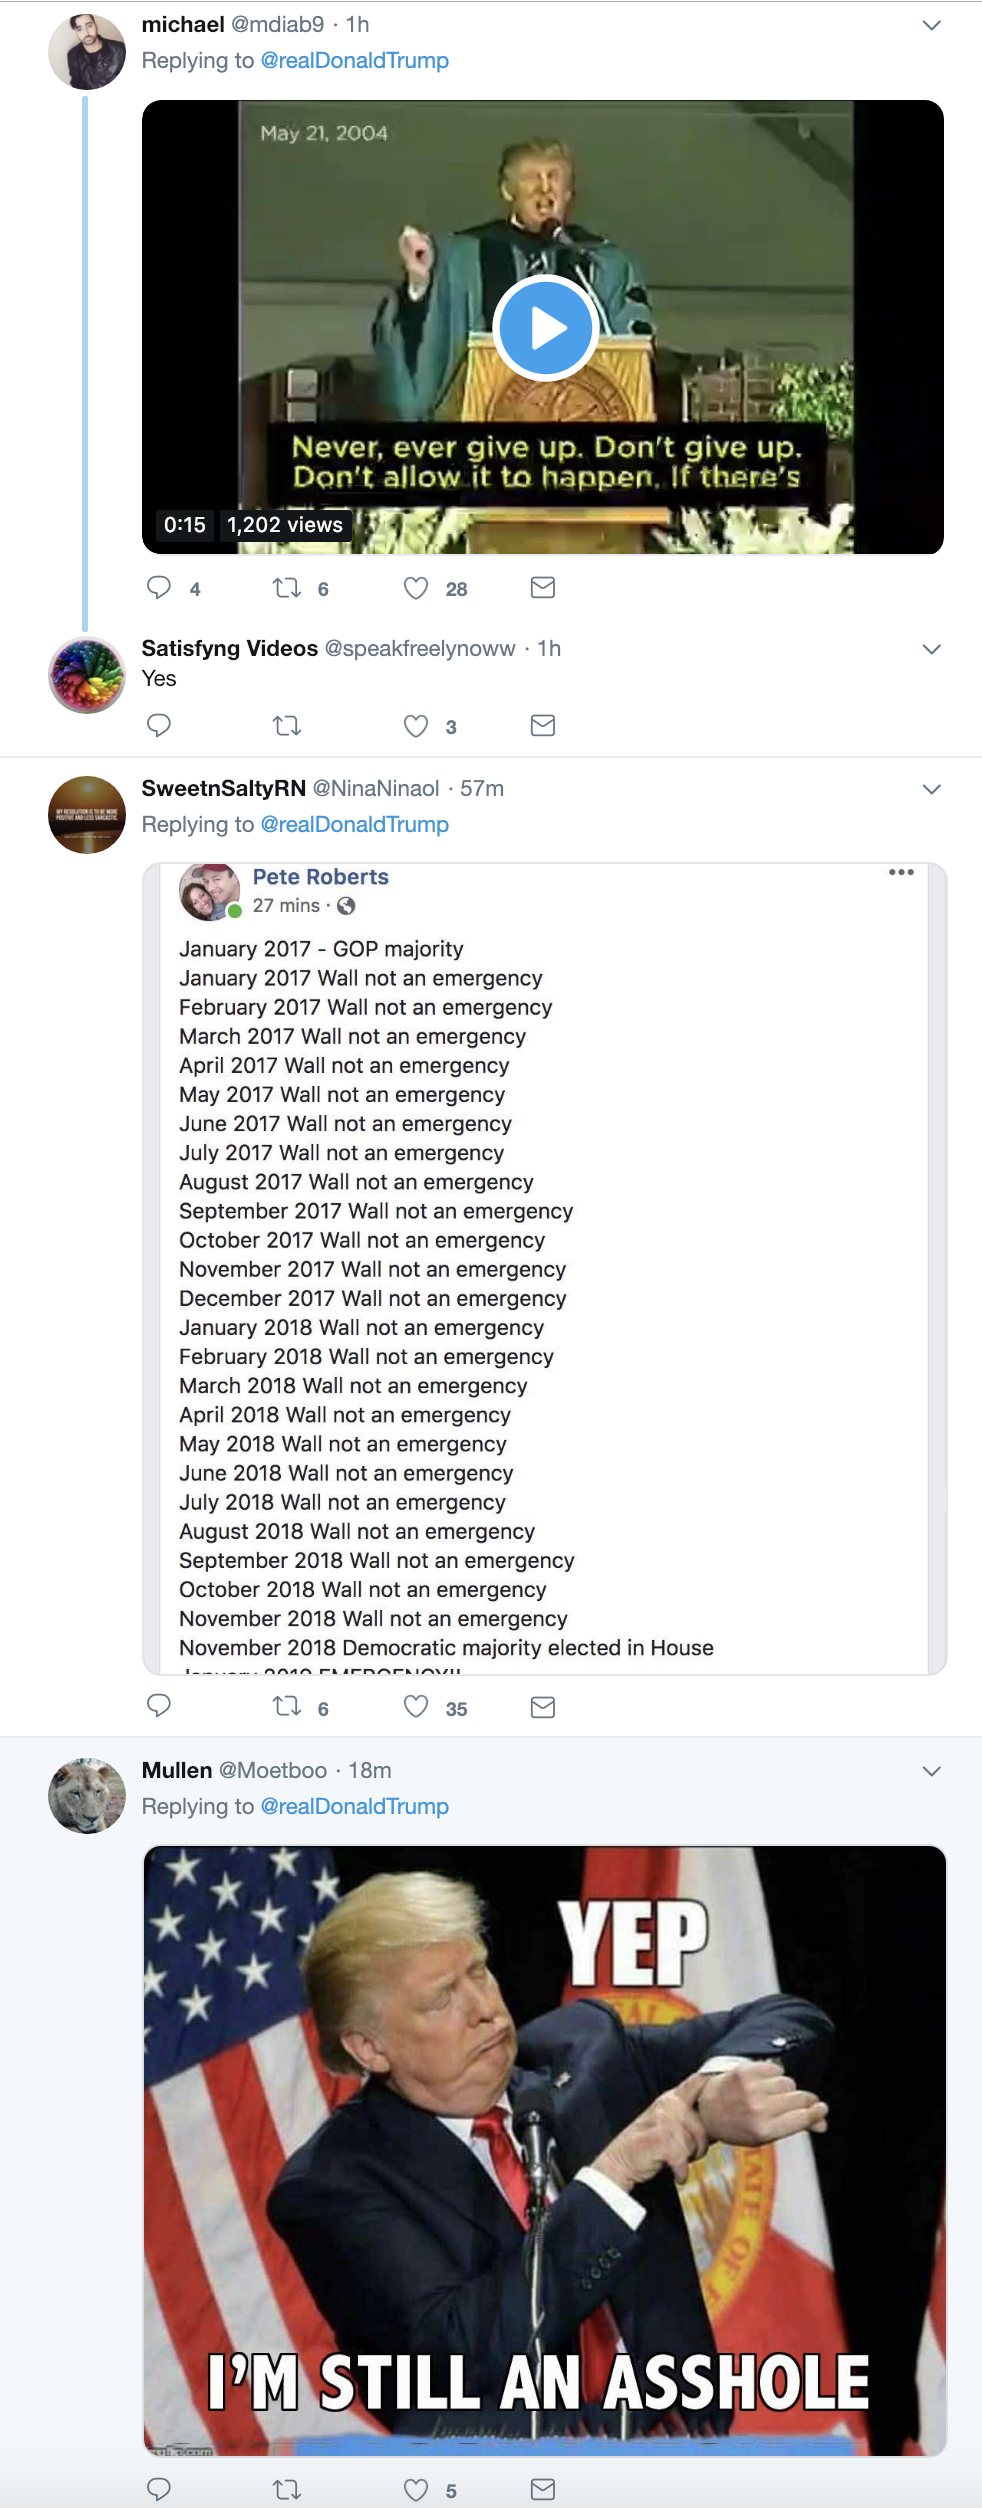 Screen-Shot-2019-01-14-at-7.33.58-AM.png?zoom=2 Trumps Unloads Pelosi Aggressions On Twitter Like A Lunatic & Gets Mocked Corruption Crime DACA Domestic Policy Donald Trump Immigration Politics Top Stories 